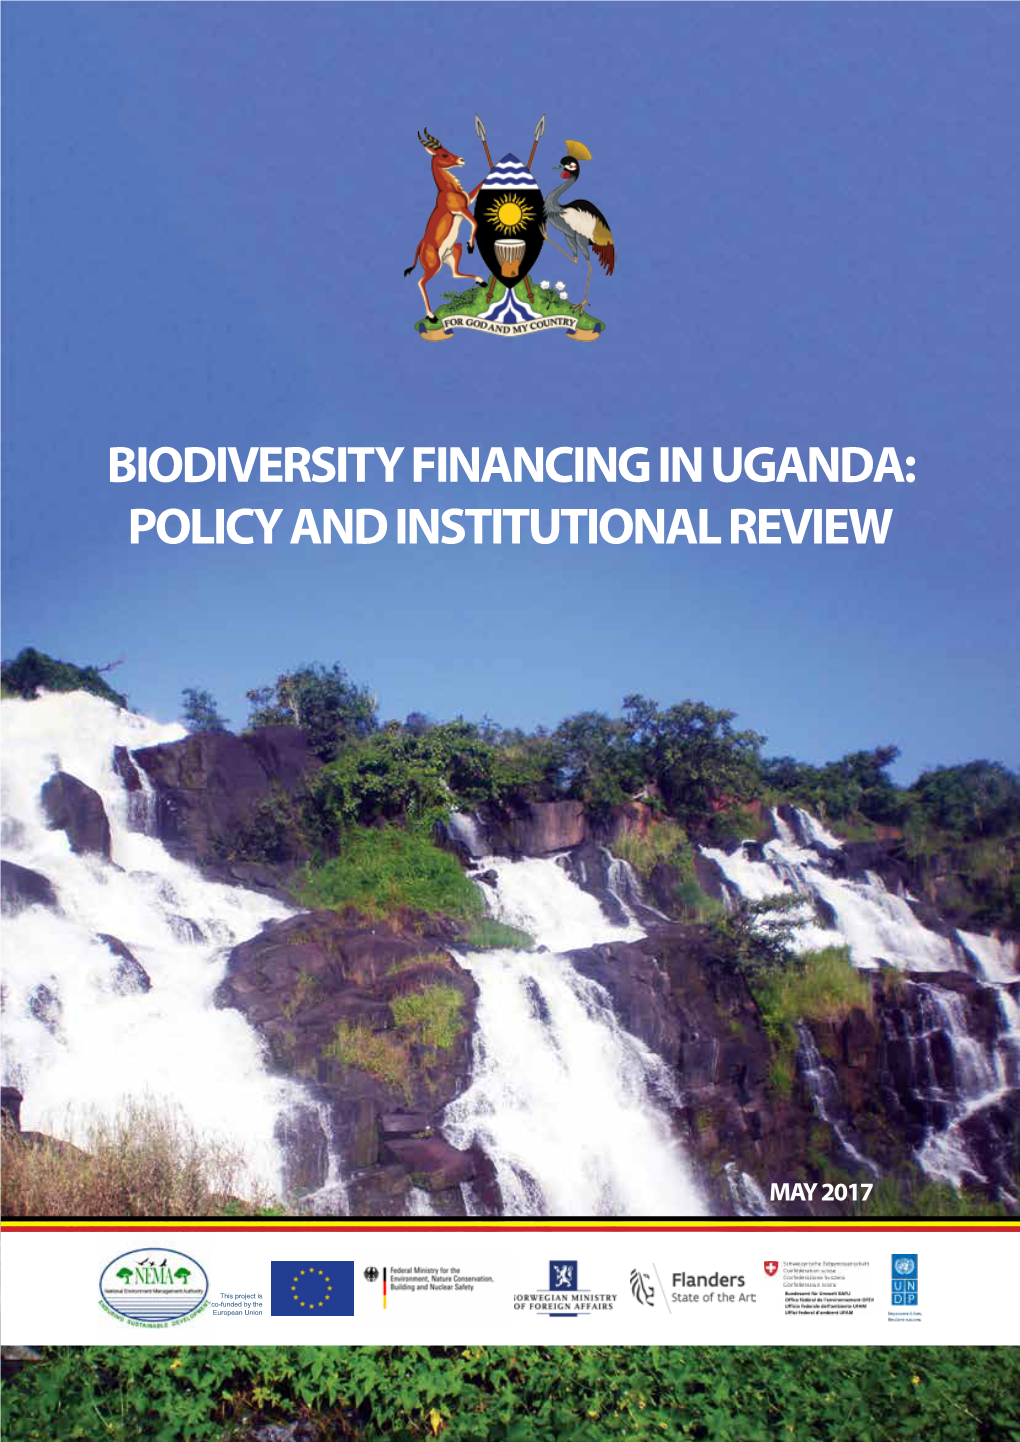 Biodiversity Financing in Uganda: Policy and Institutional Review